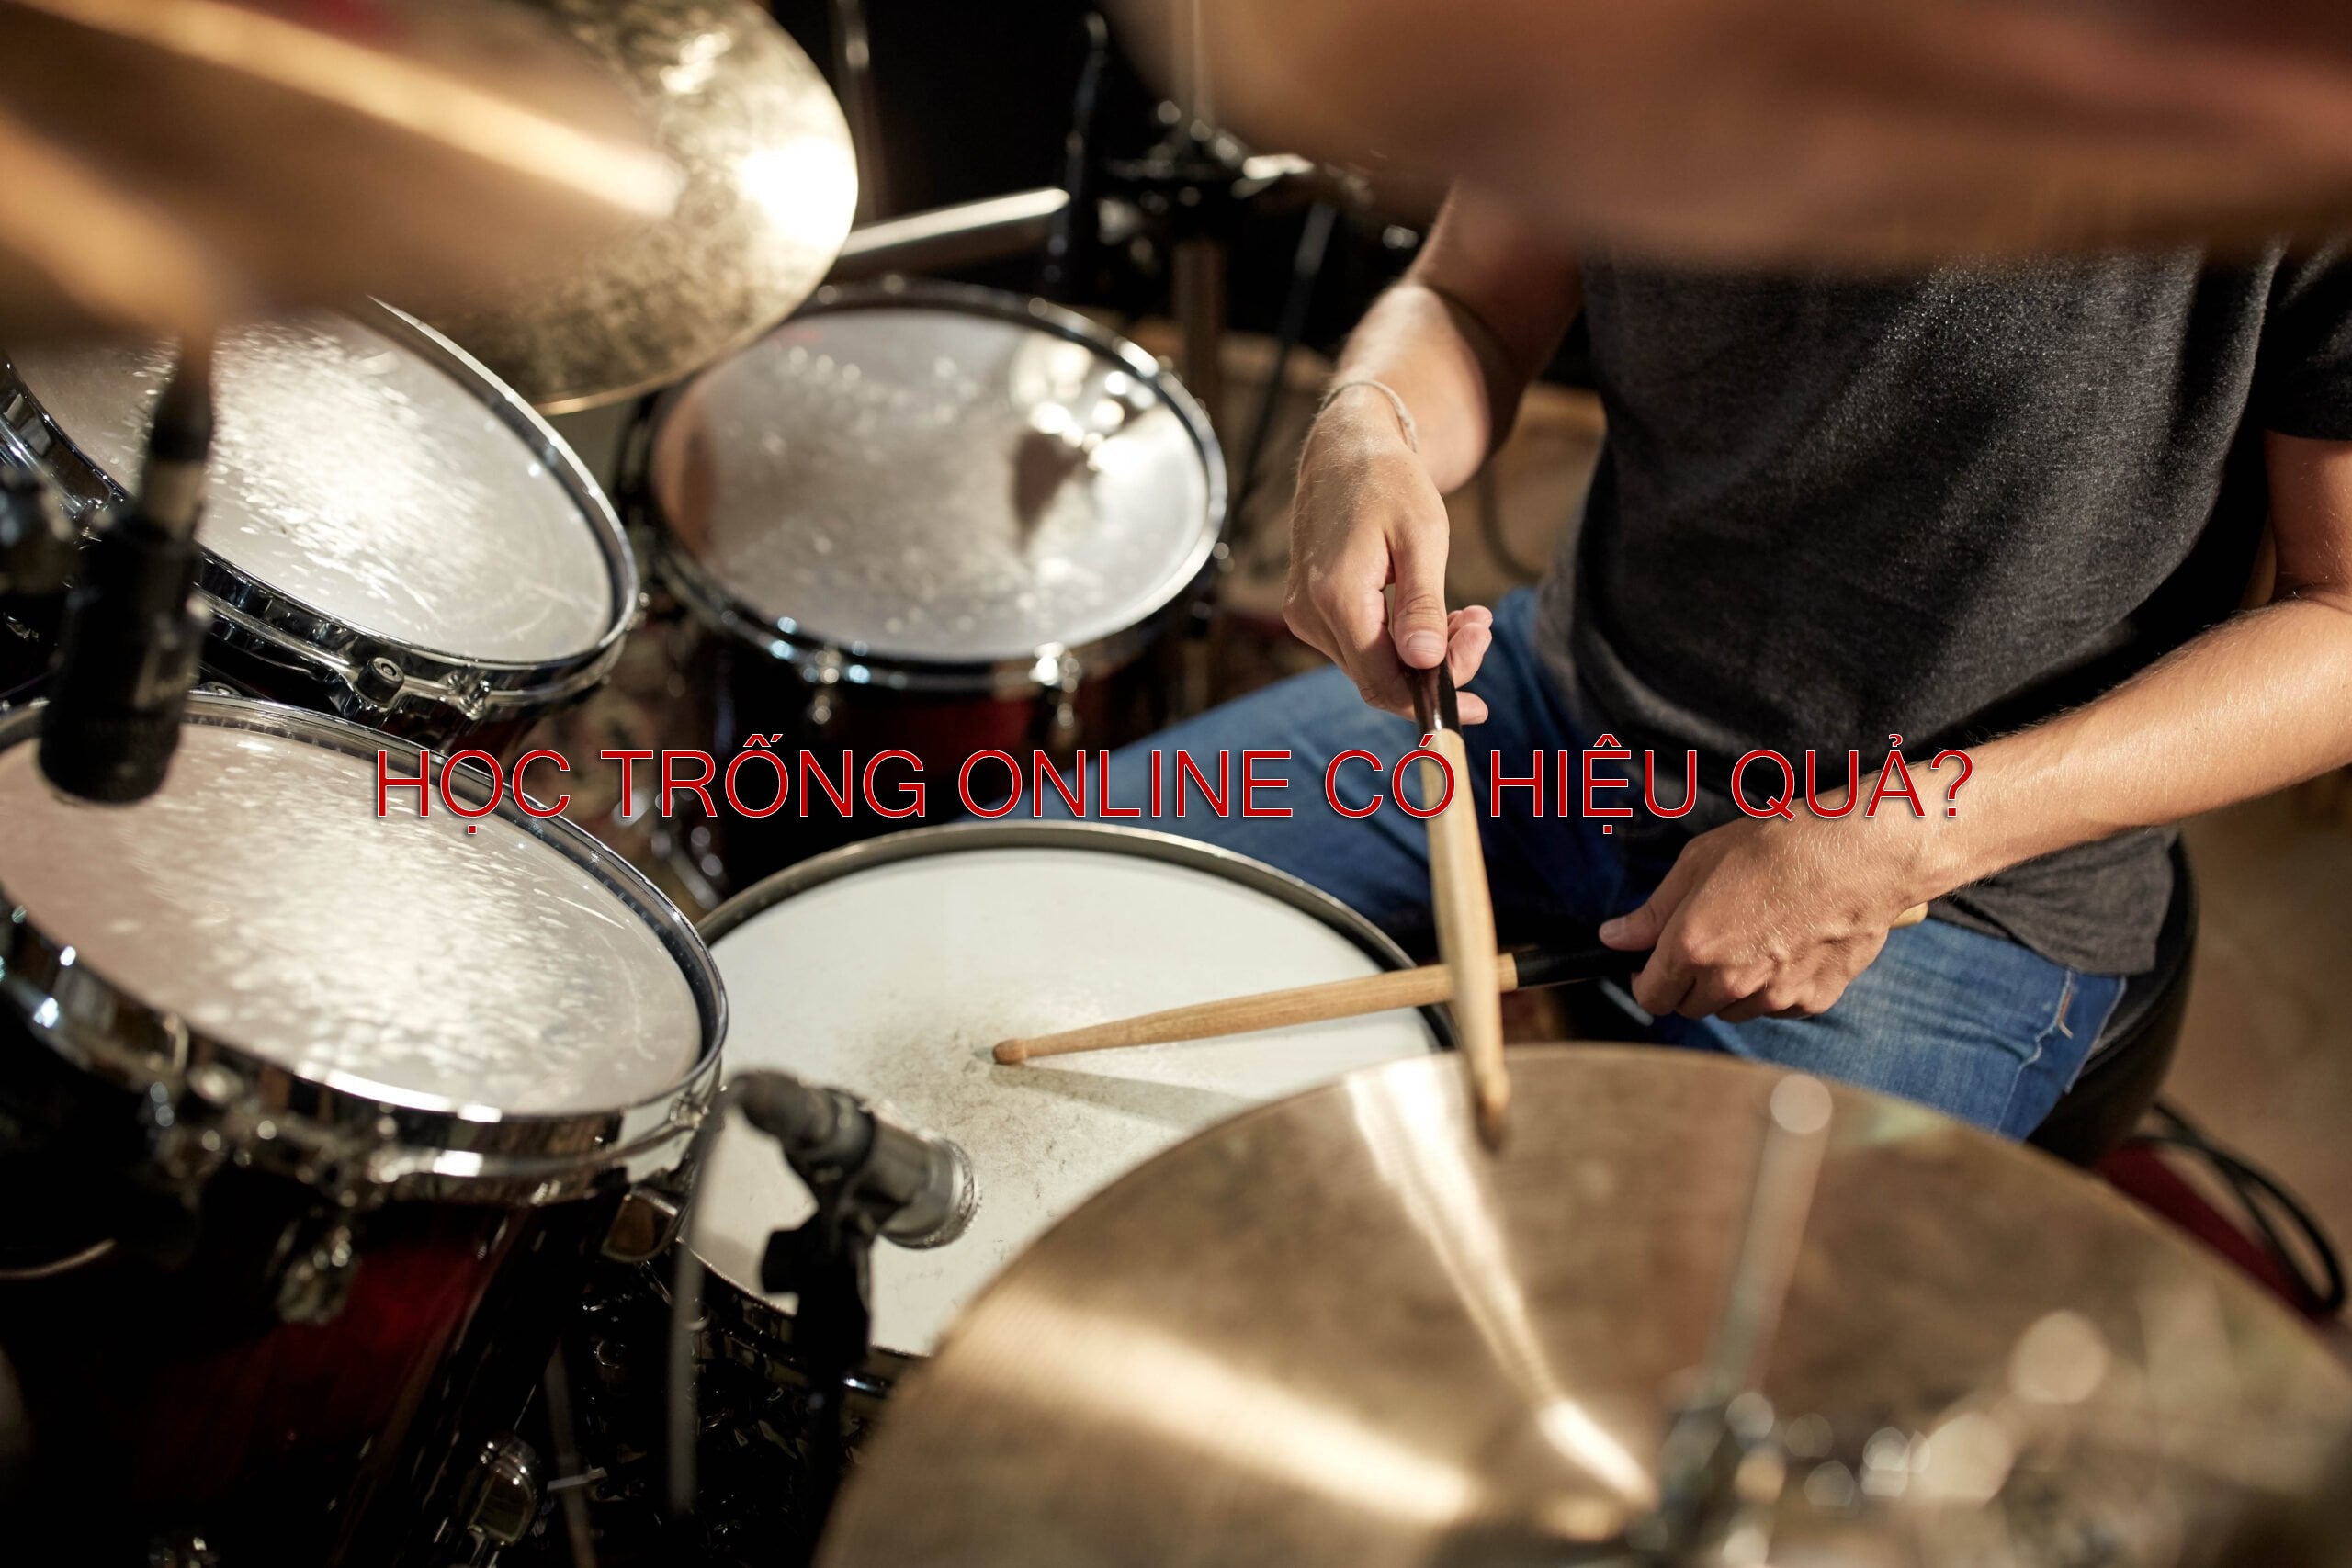 Is online drum learning effective or not?